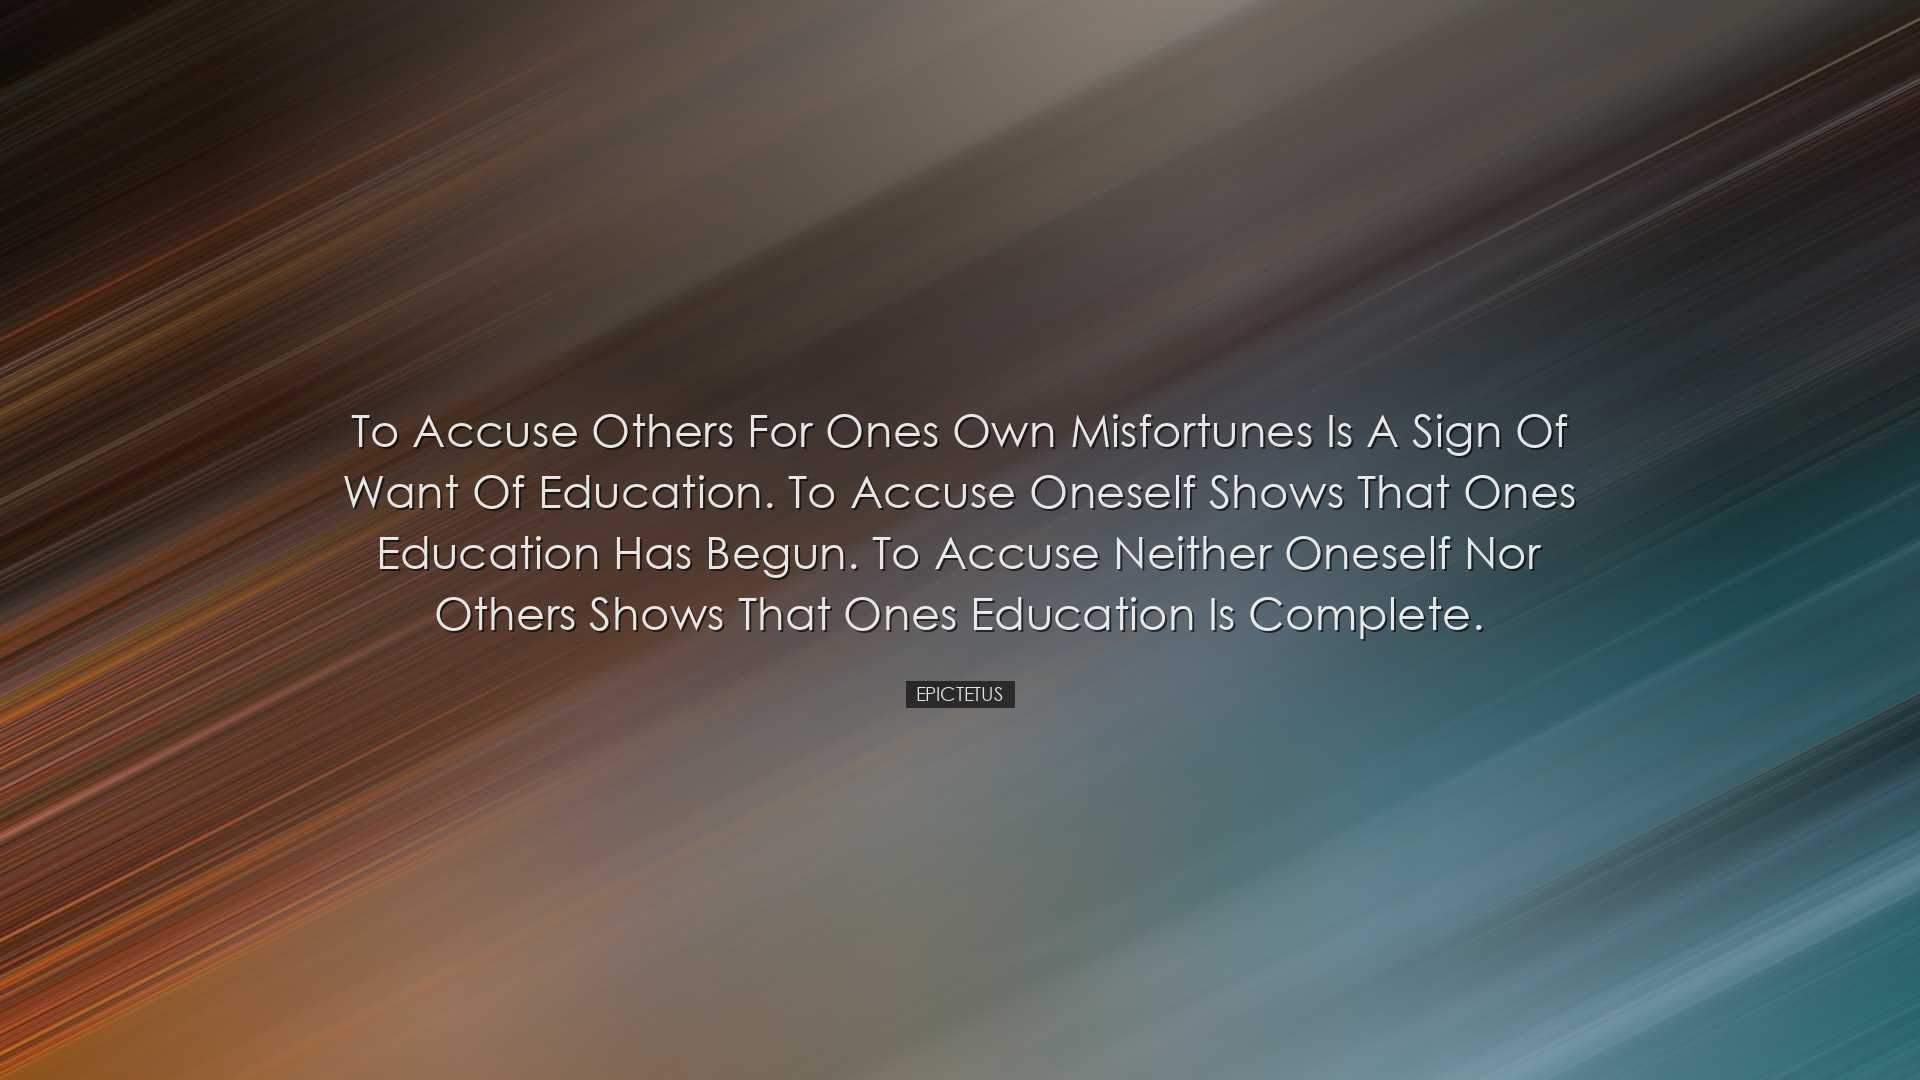 To accuse others for ones own misfortunes is a sign of want of edu